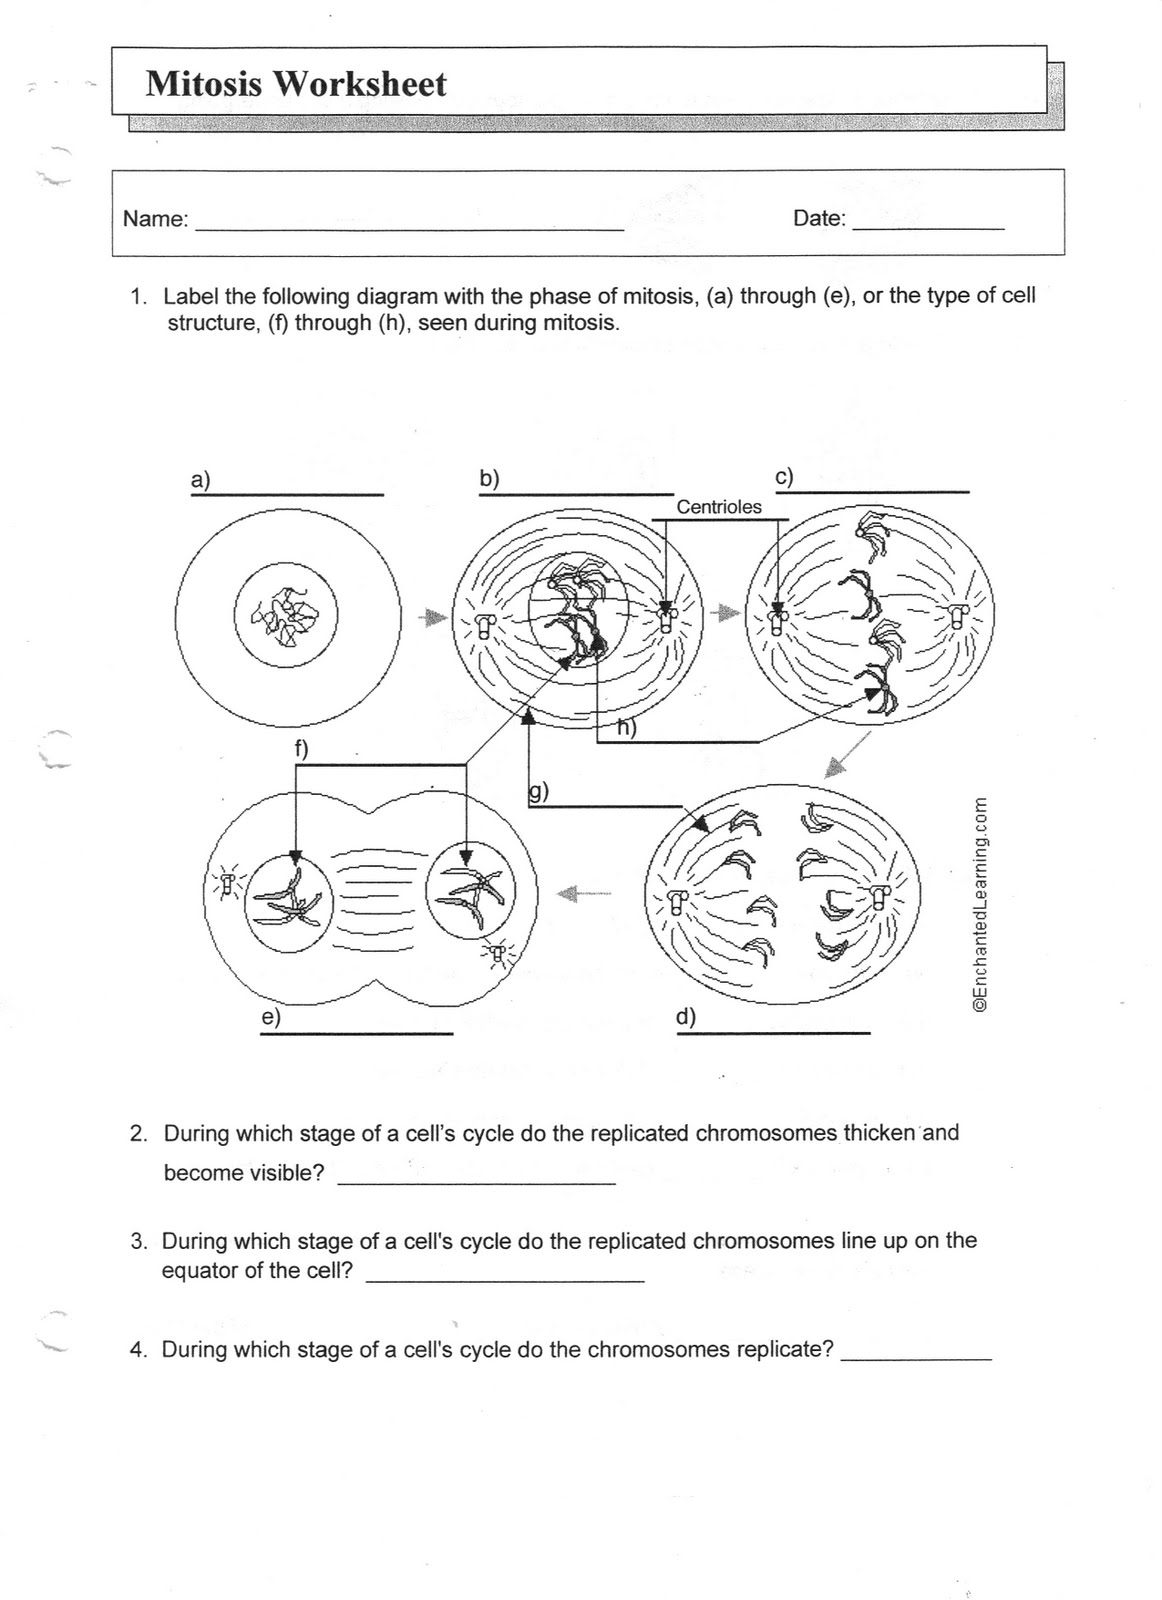 13-best-images-of-mitosis-notes-worksheet-mitosis-worksheet-answers-mitosis-worksheet-answer